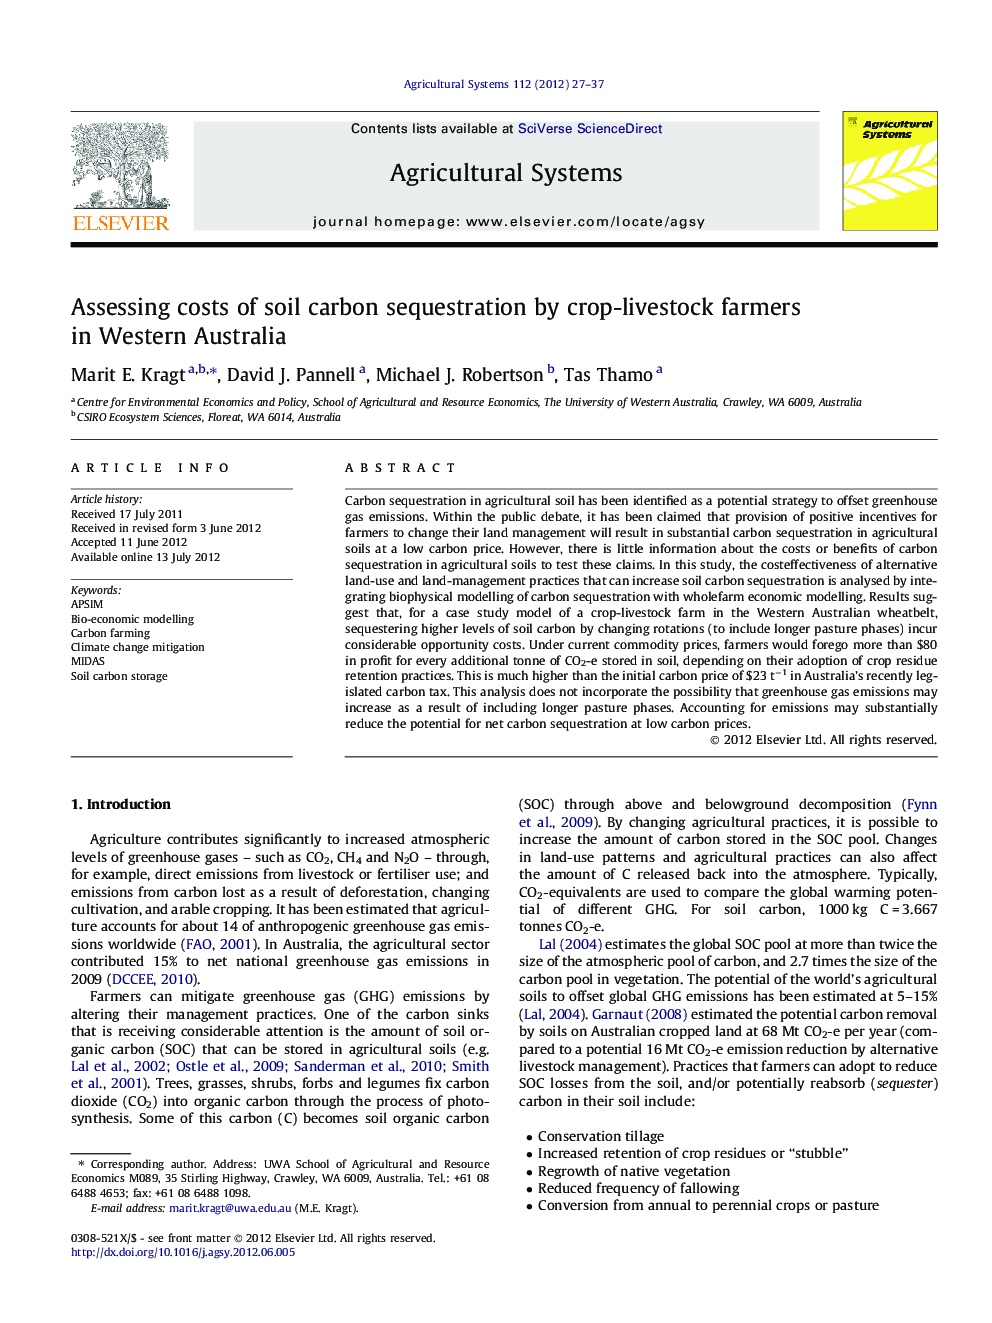 Assessing costs of soil carbon sequestration by crop-livestock farmers in Western Australia